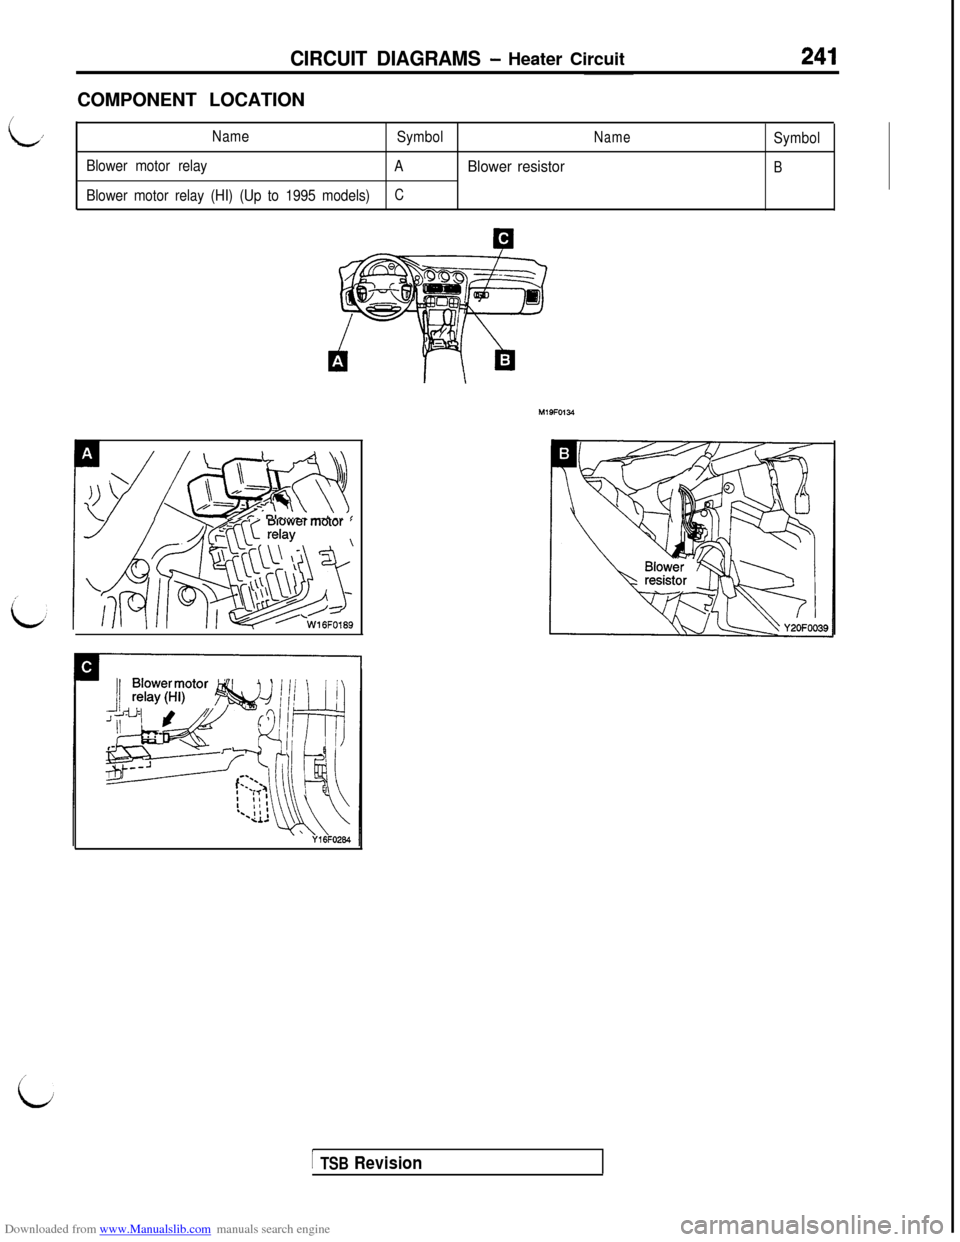 MITSUBISHI 3000GT 1993 2.G Workshop Manual Downloaded from www.Manualslib.com manuals search engine CIRCUIT DIAGRAMS - Heater CircuitCOMPONENT LOCATION
,Name
SymbolNameSymbol
Blower motor relay
A
Blower resistorB
Blower motor relay (HI) (Up to